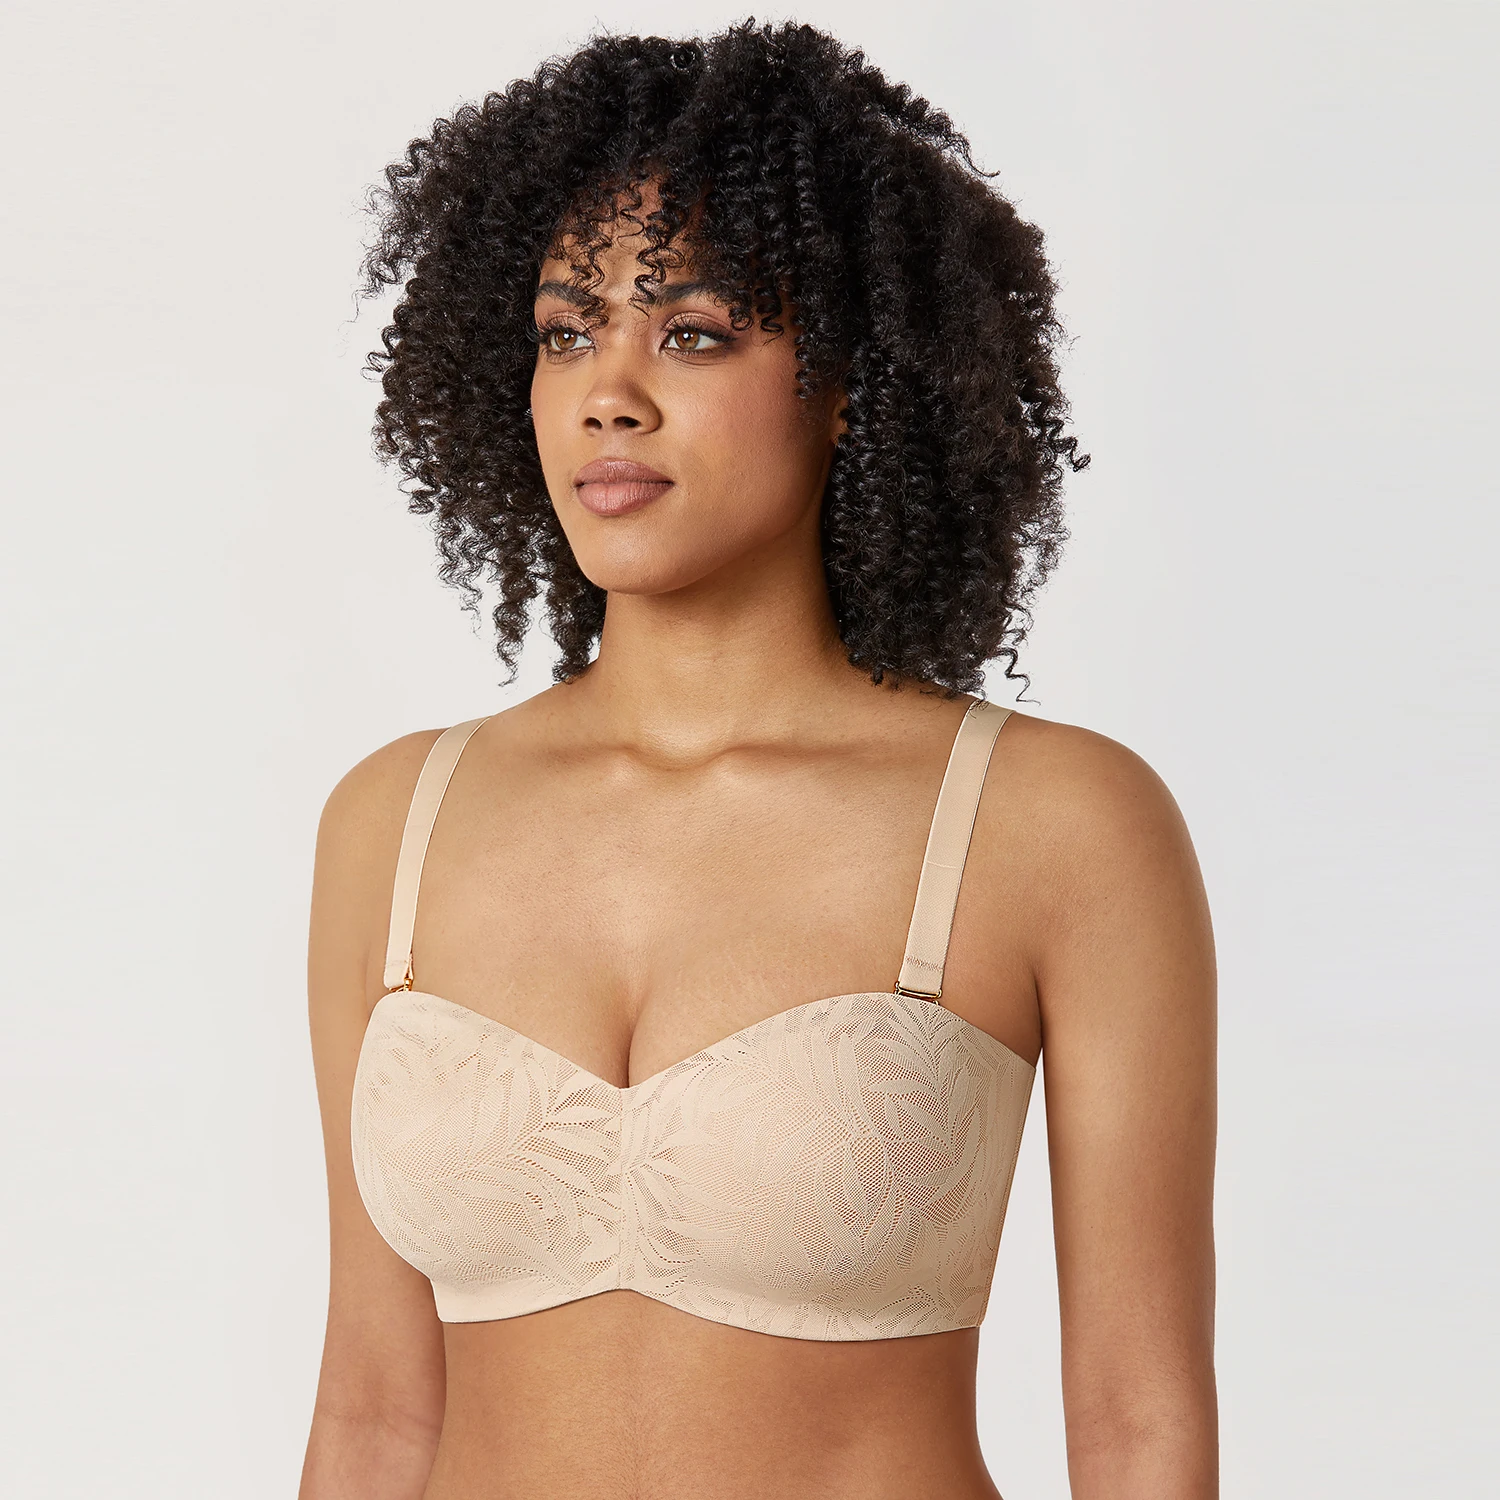 AISILIN Women's Strapless Bra Underwire Lace Unlined Sexy Plus Size